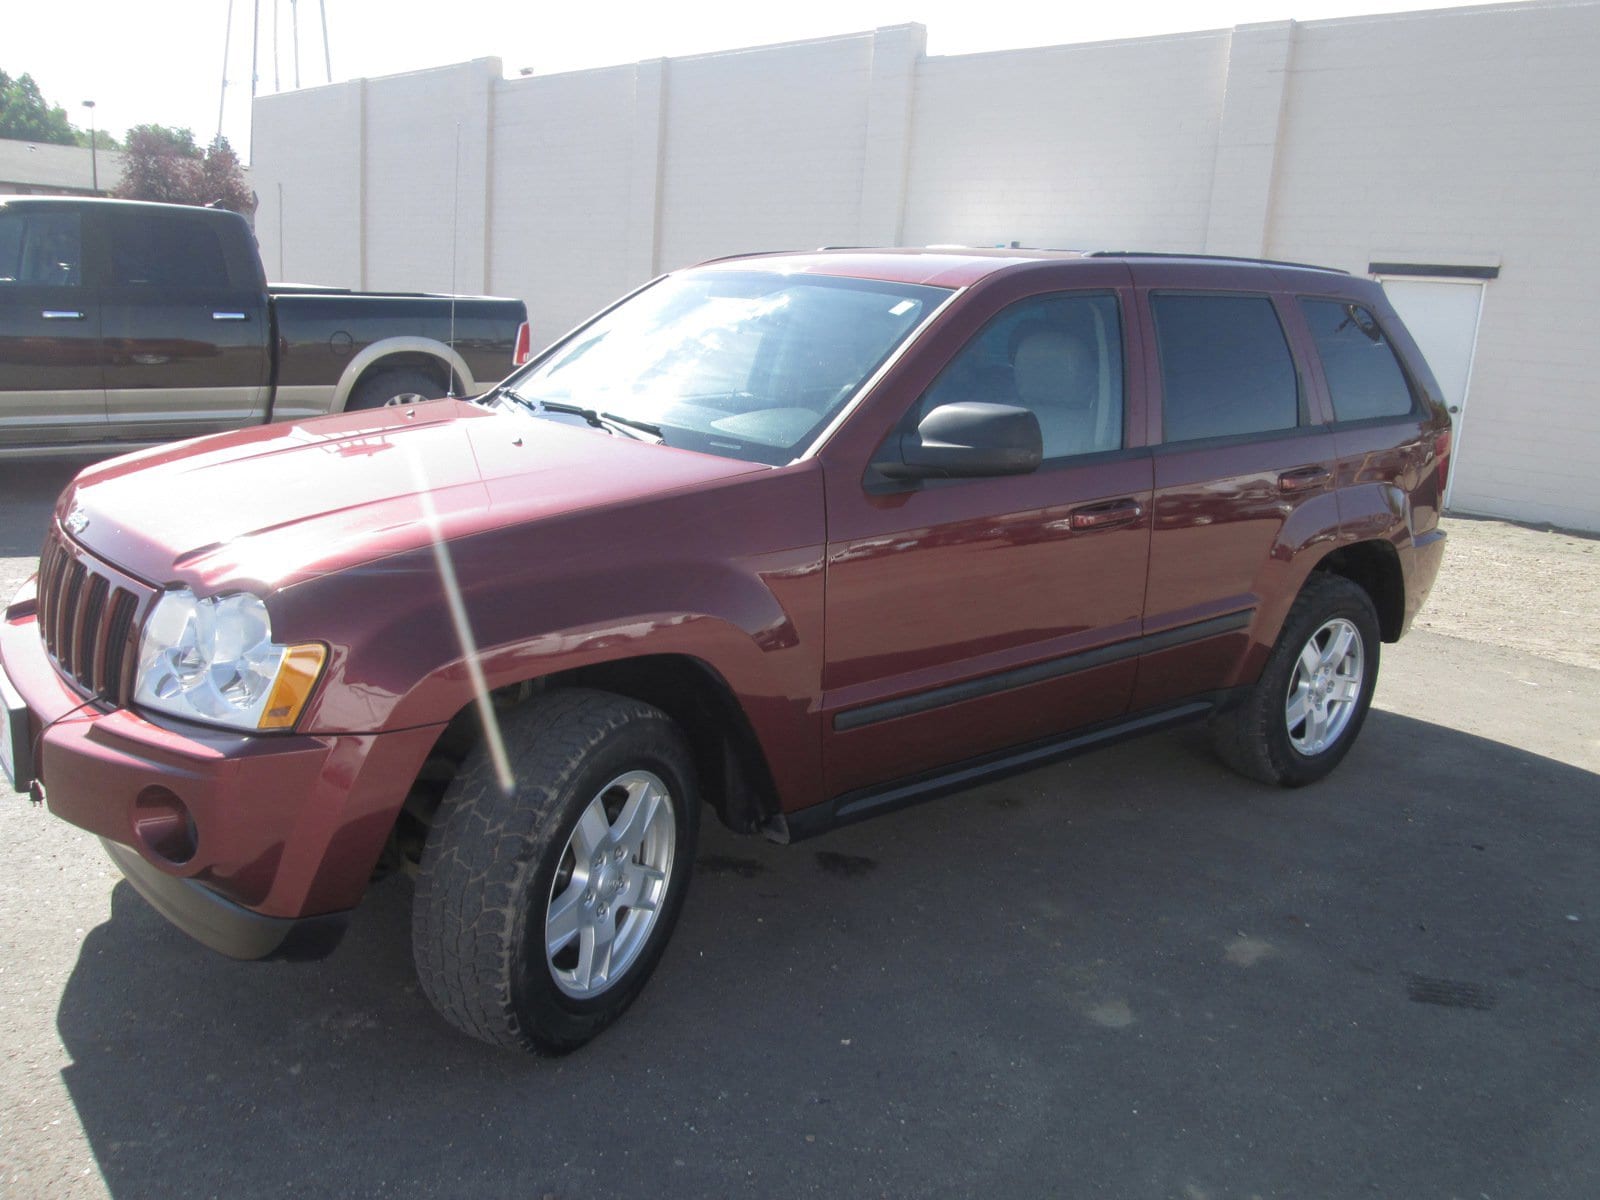 Used 2007 Jeep Grand Cherokee Laredo with VIN 1J8GR48K67C668534 for sale in Chinook, MT